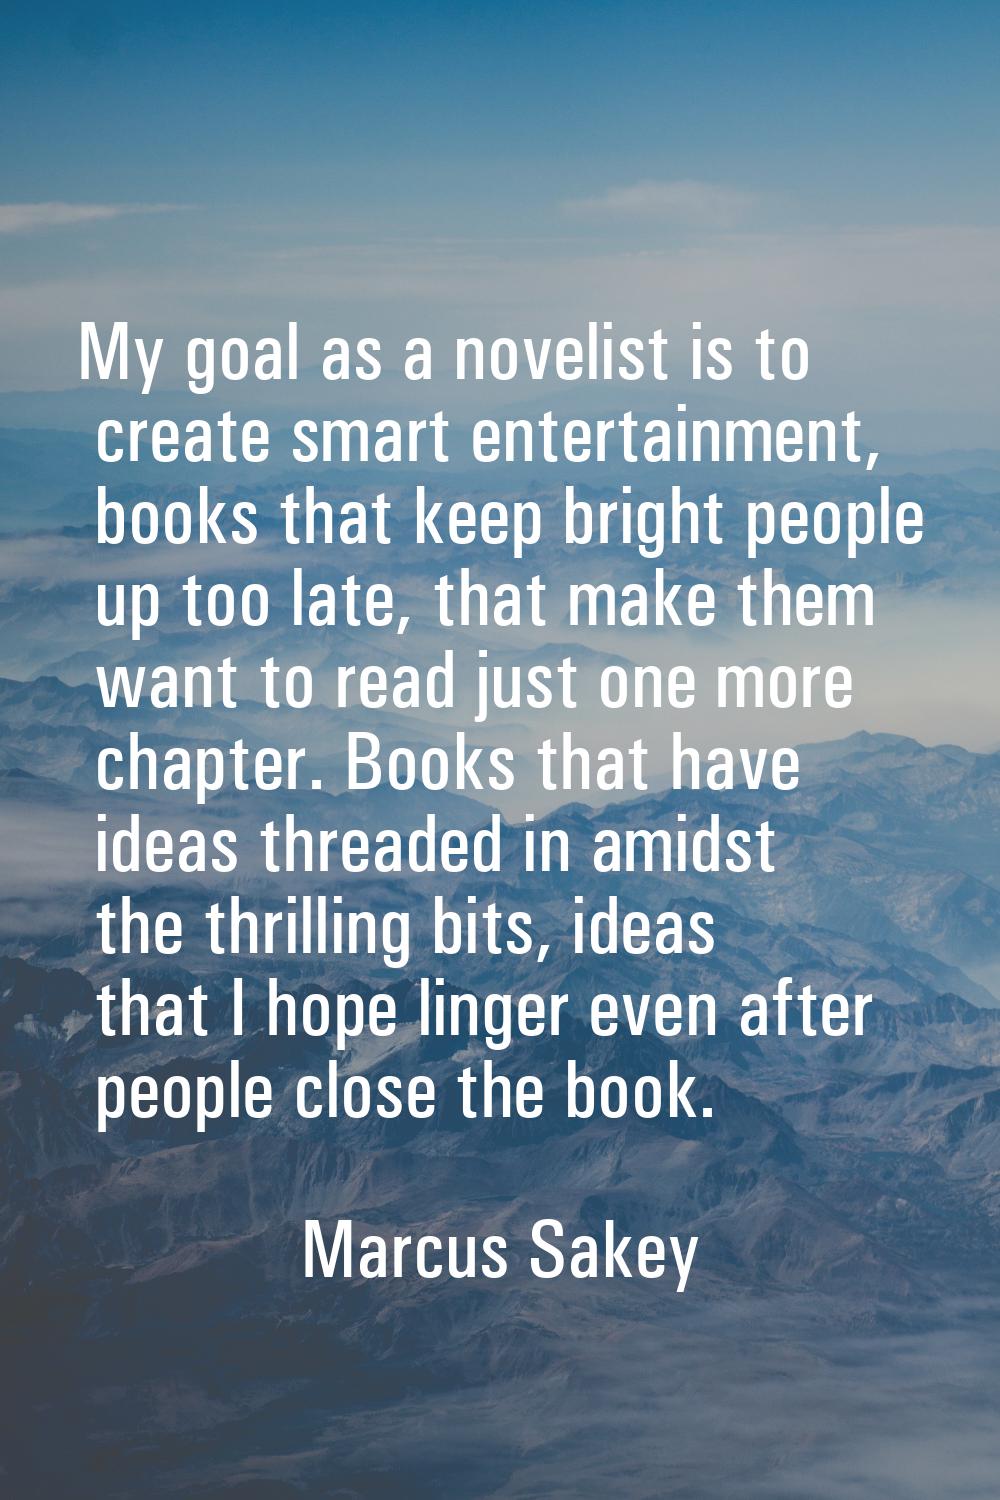 My goal as a novelist is to create smart entertainment, books that keep bright people up too late, 